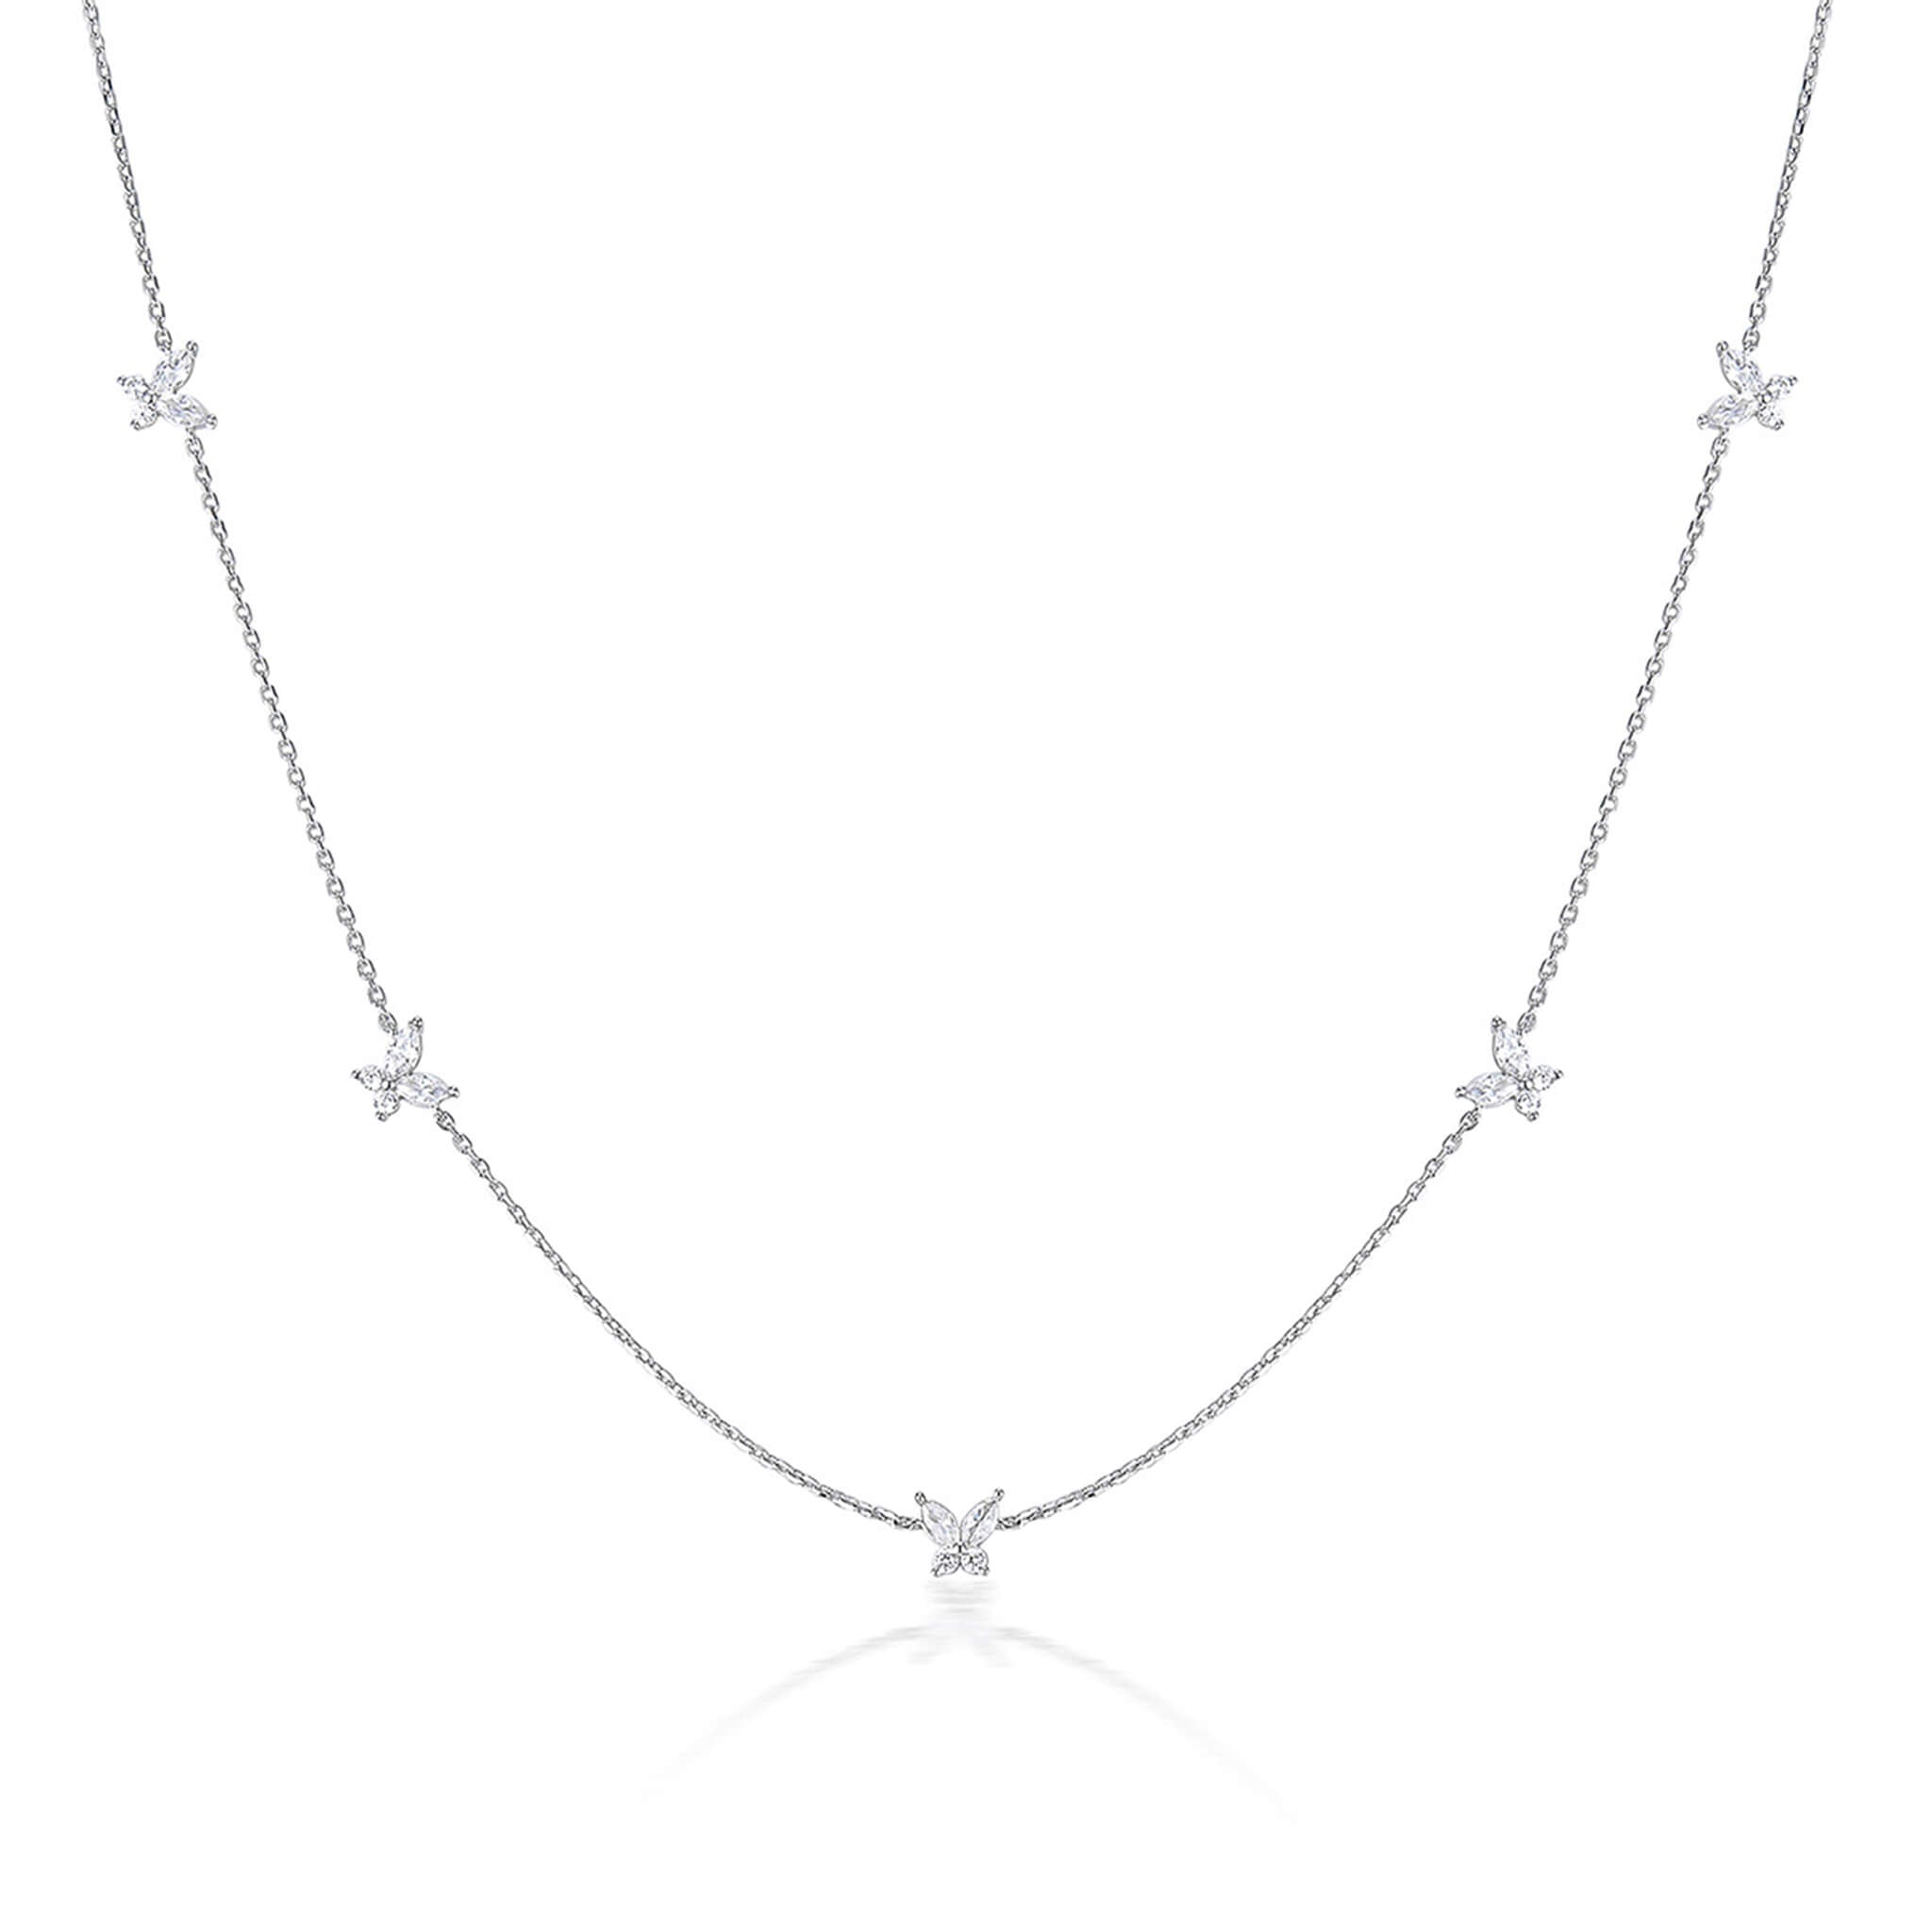 Fashion 925 Silver Stackable Butterfly Pendant Zircon-Inlaid Collarbone Chain  UponBasics Necklace Silver 